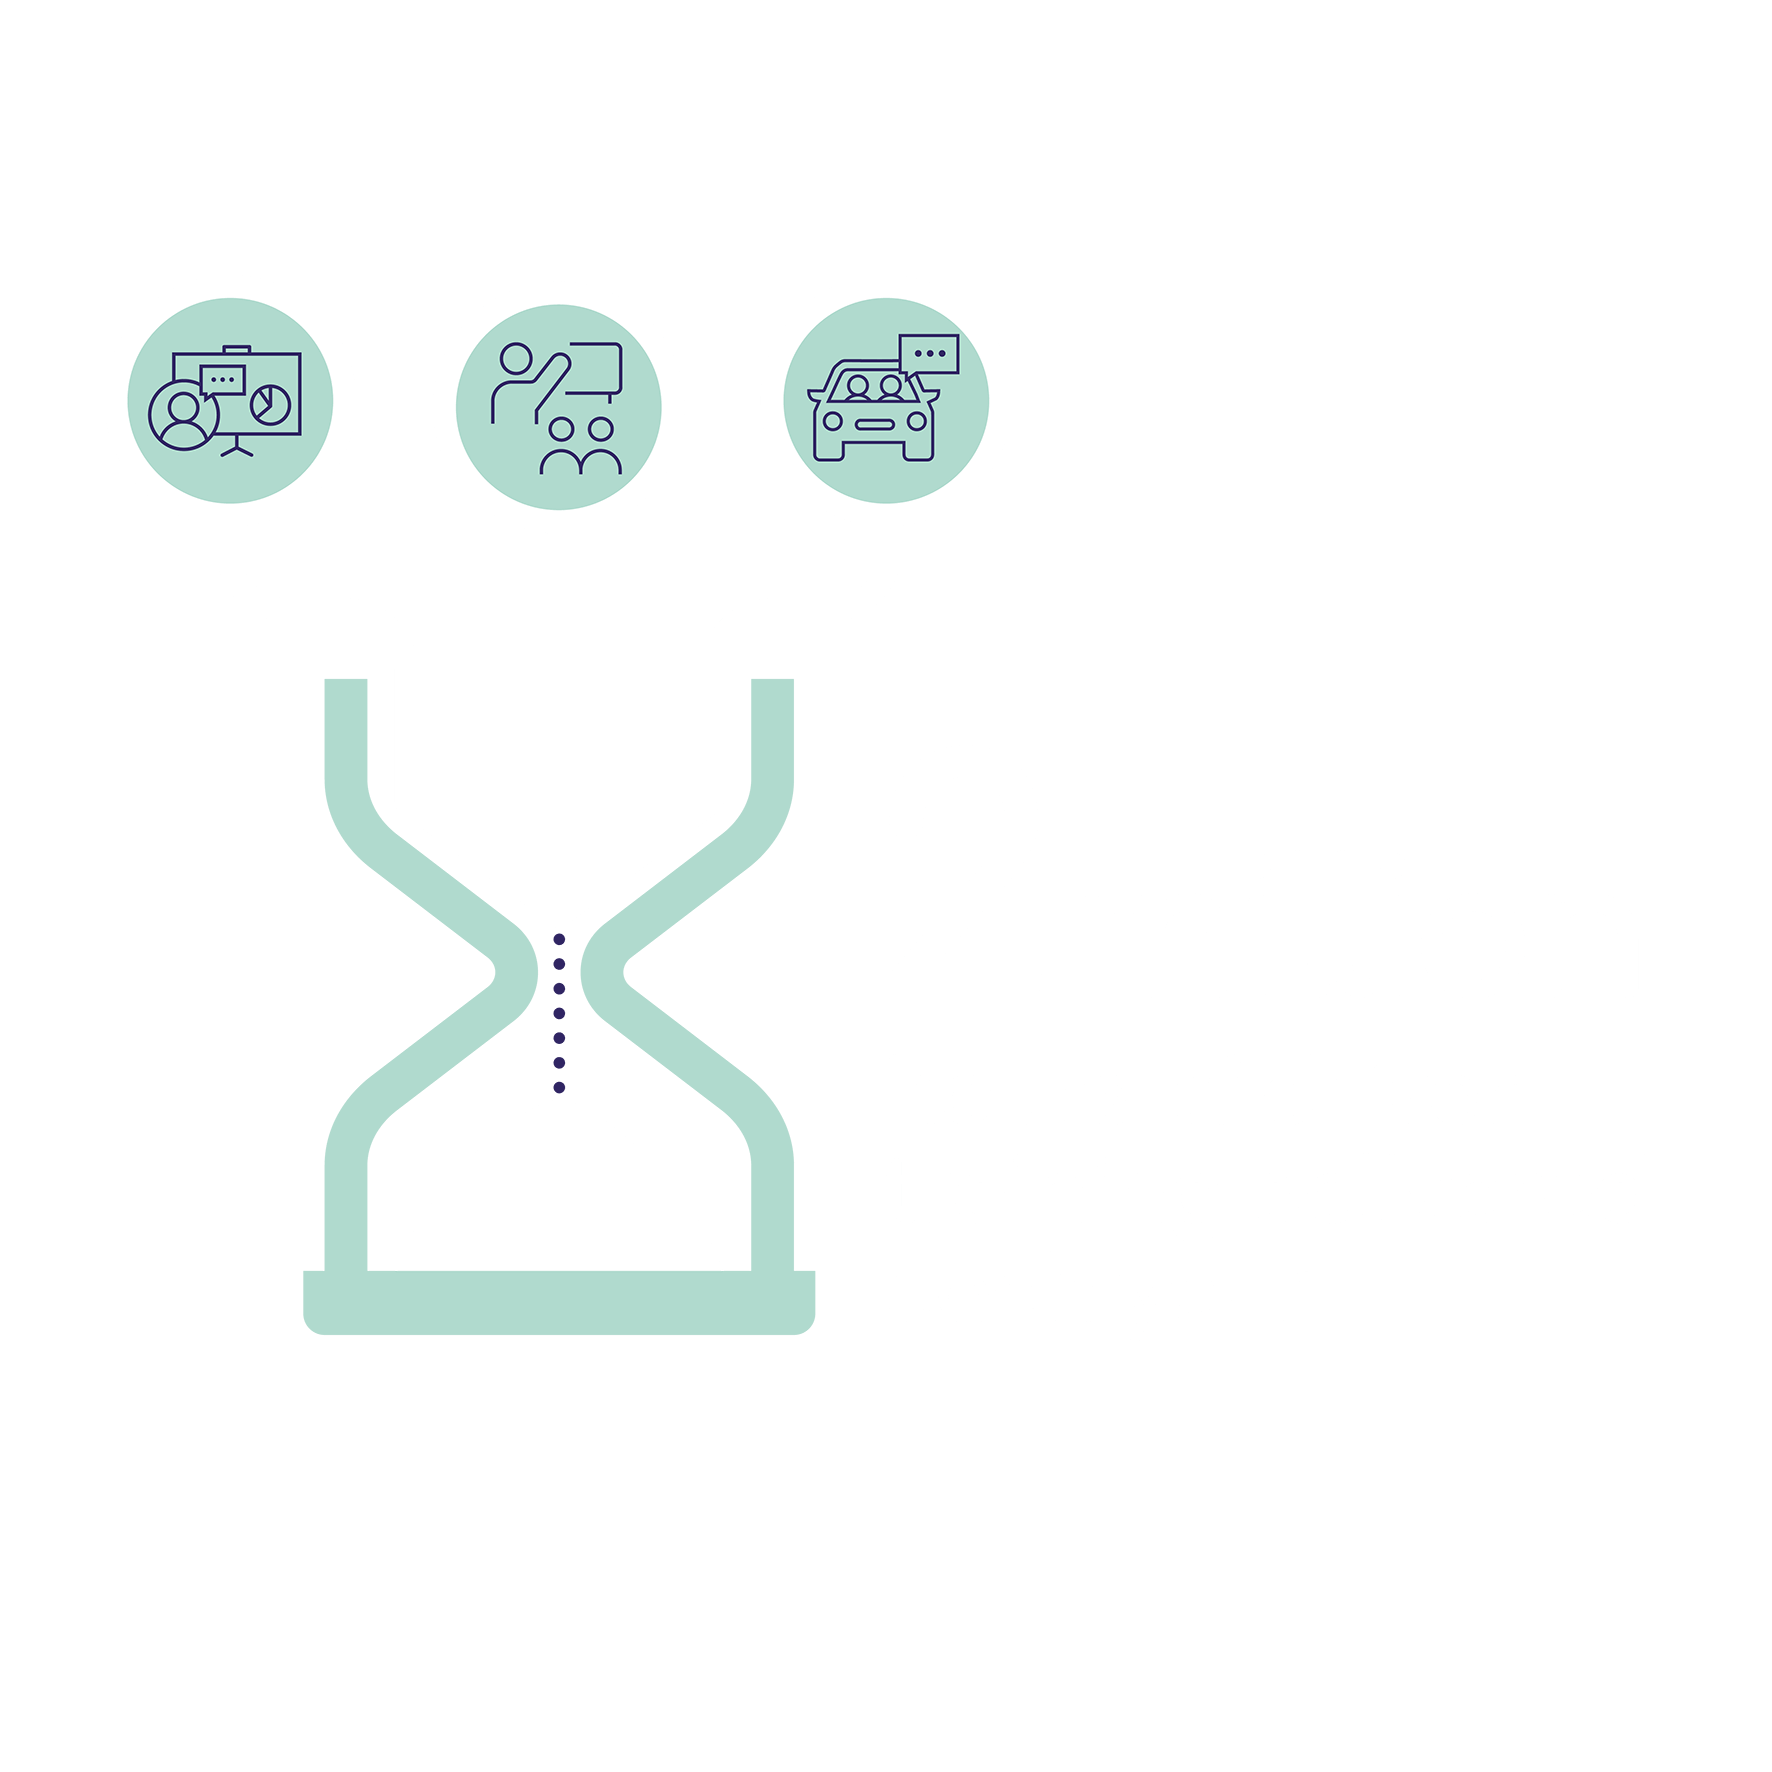 2 million hours of driver training